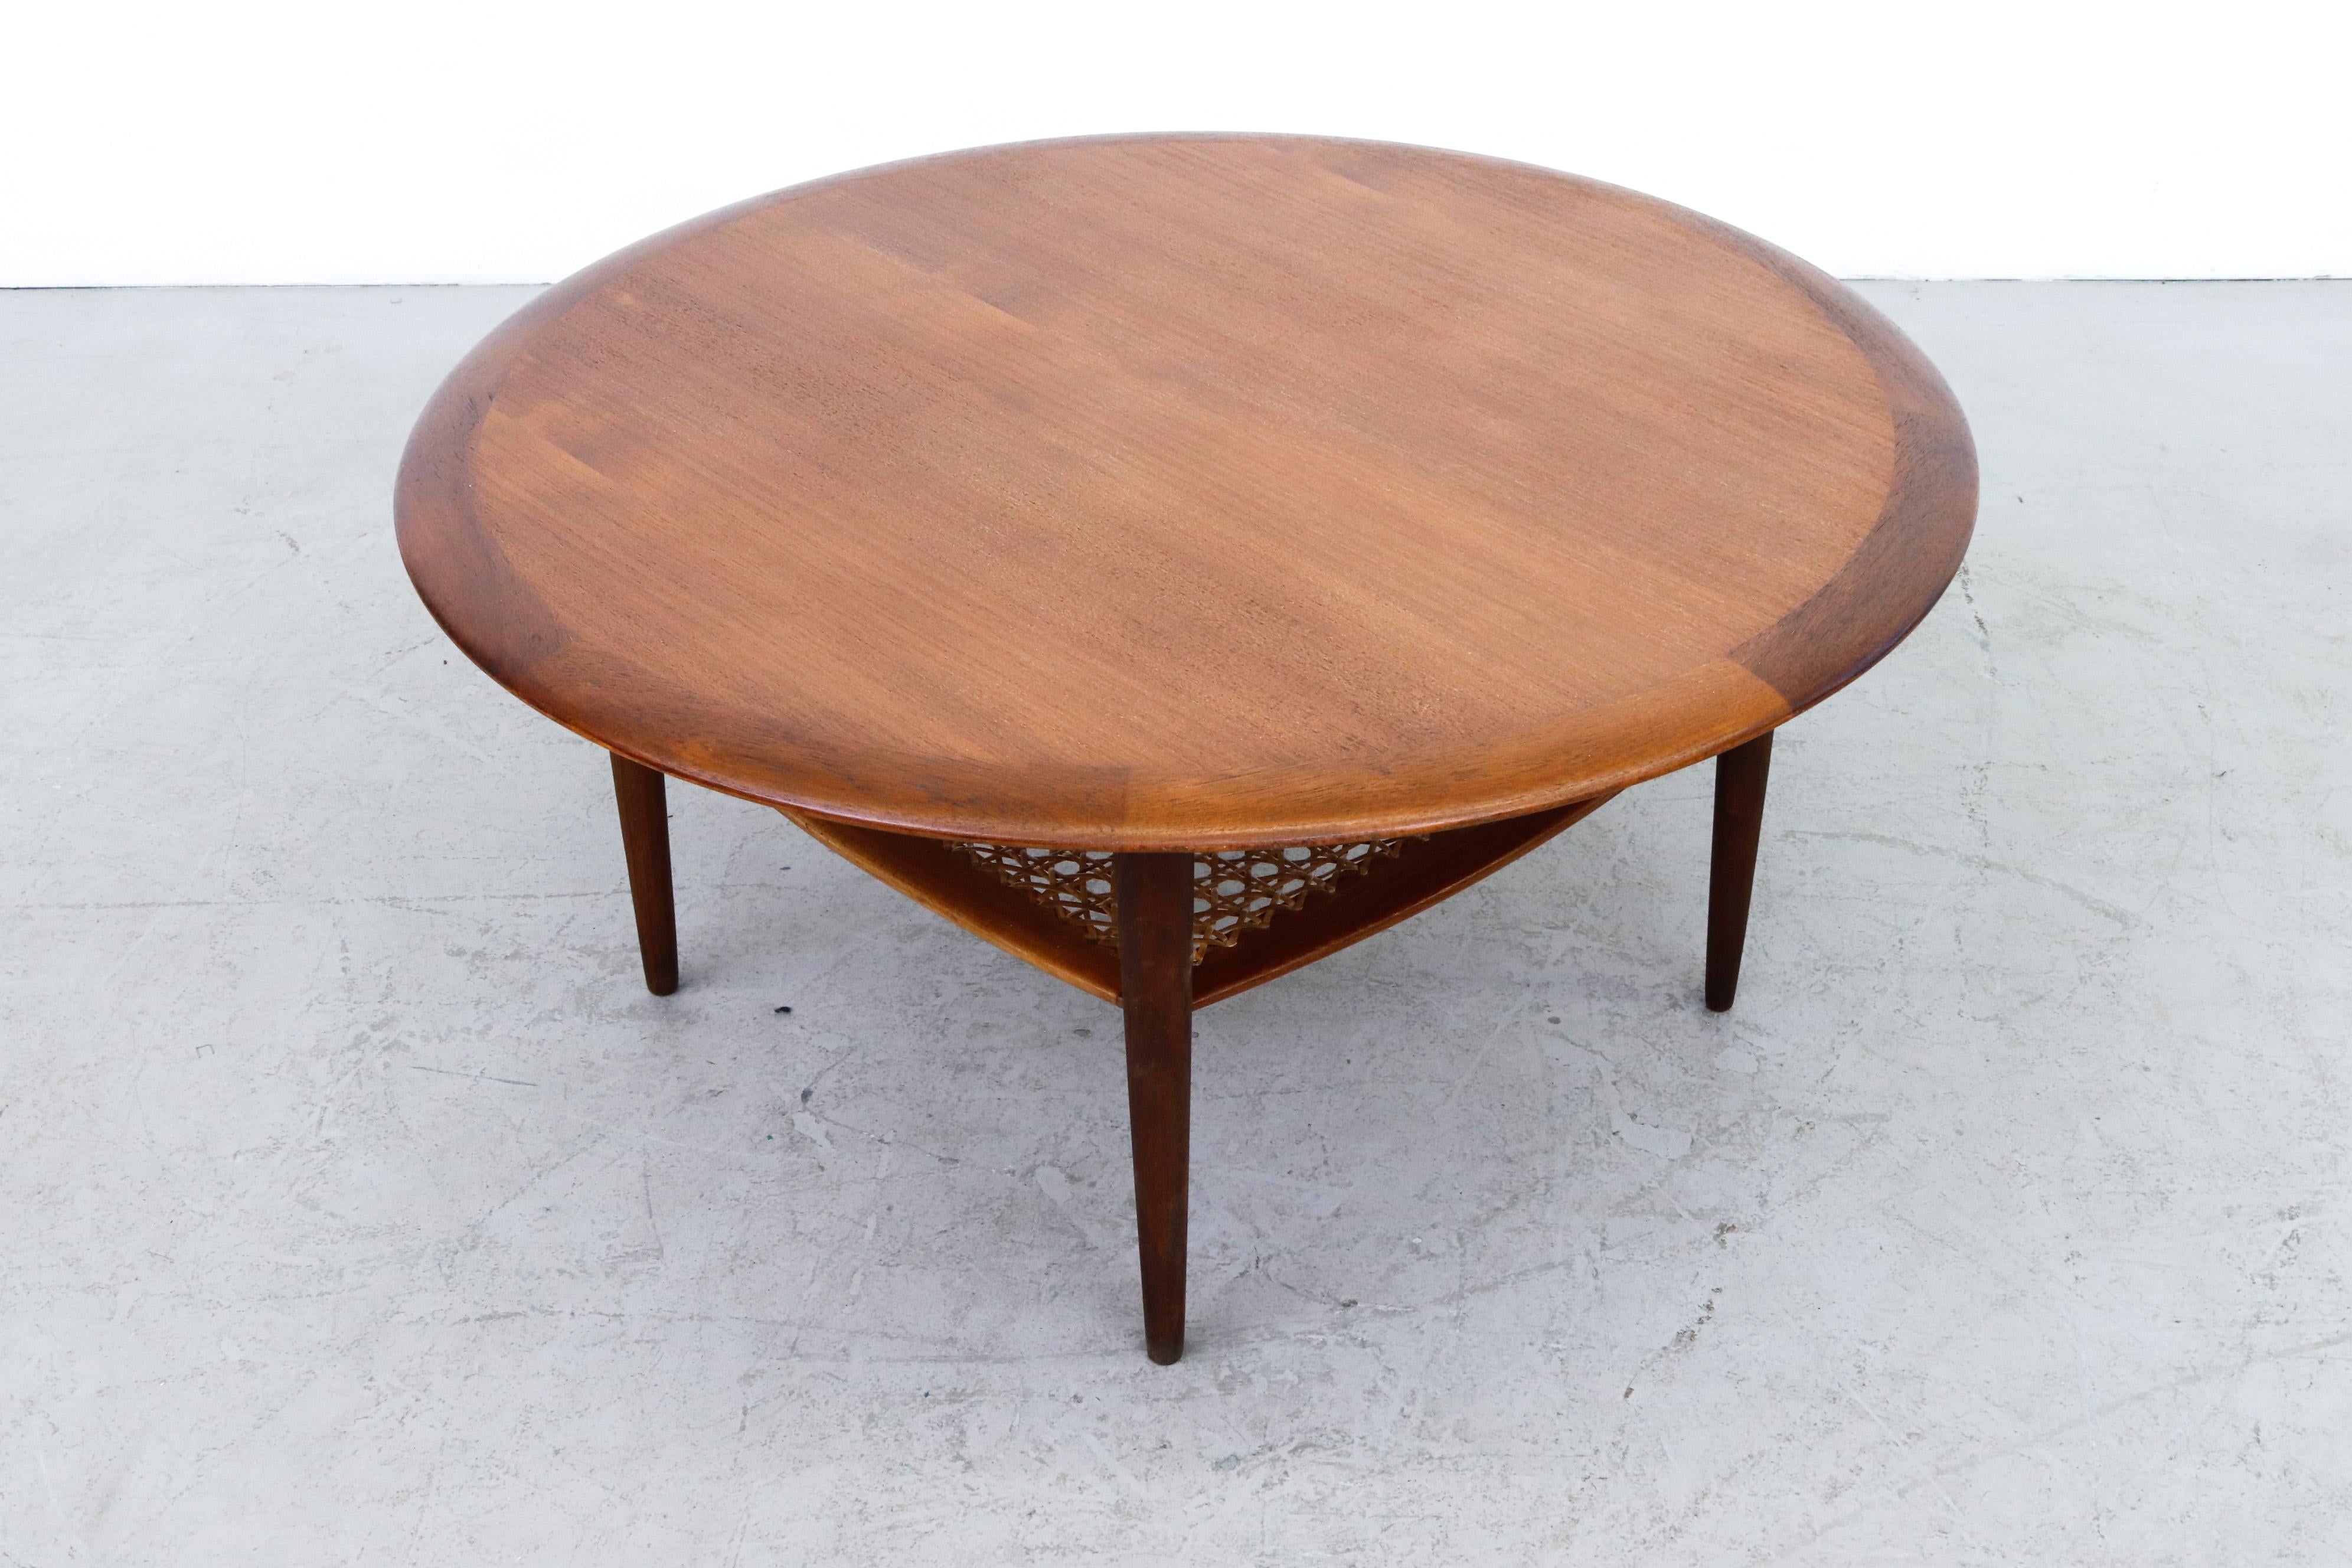 Mid-20th Century France & Son Teak Coffee Table with Rattan Lower Shelf, 1960's